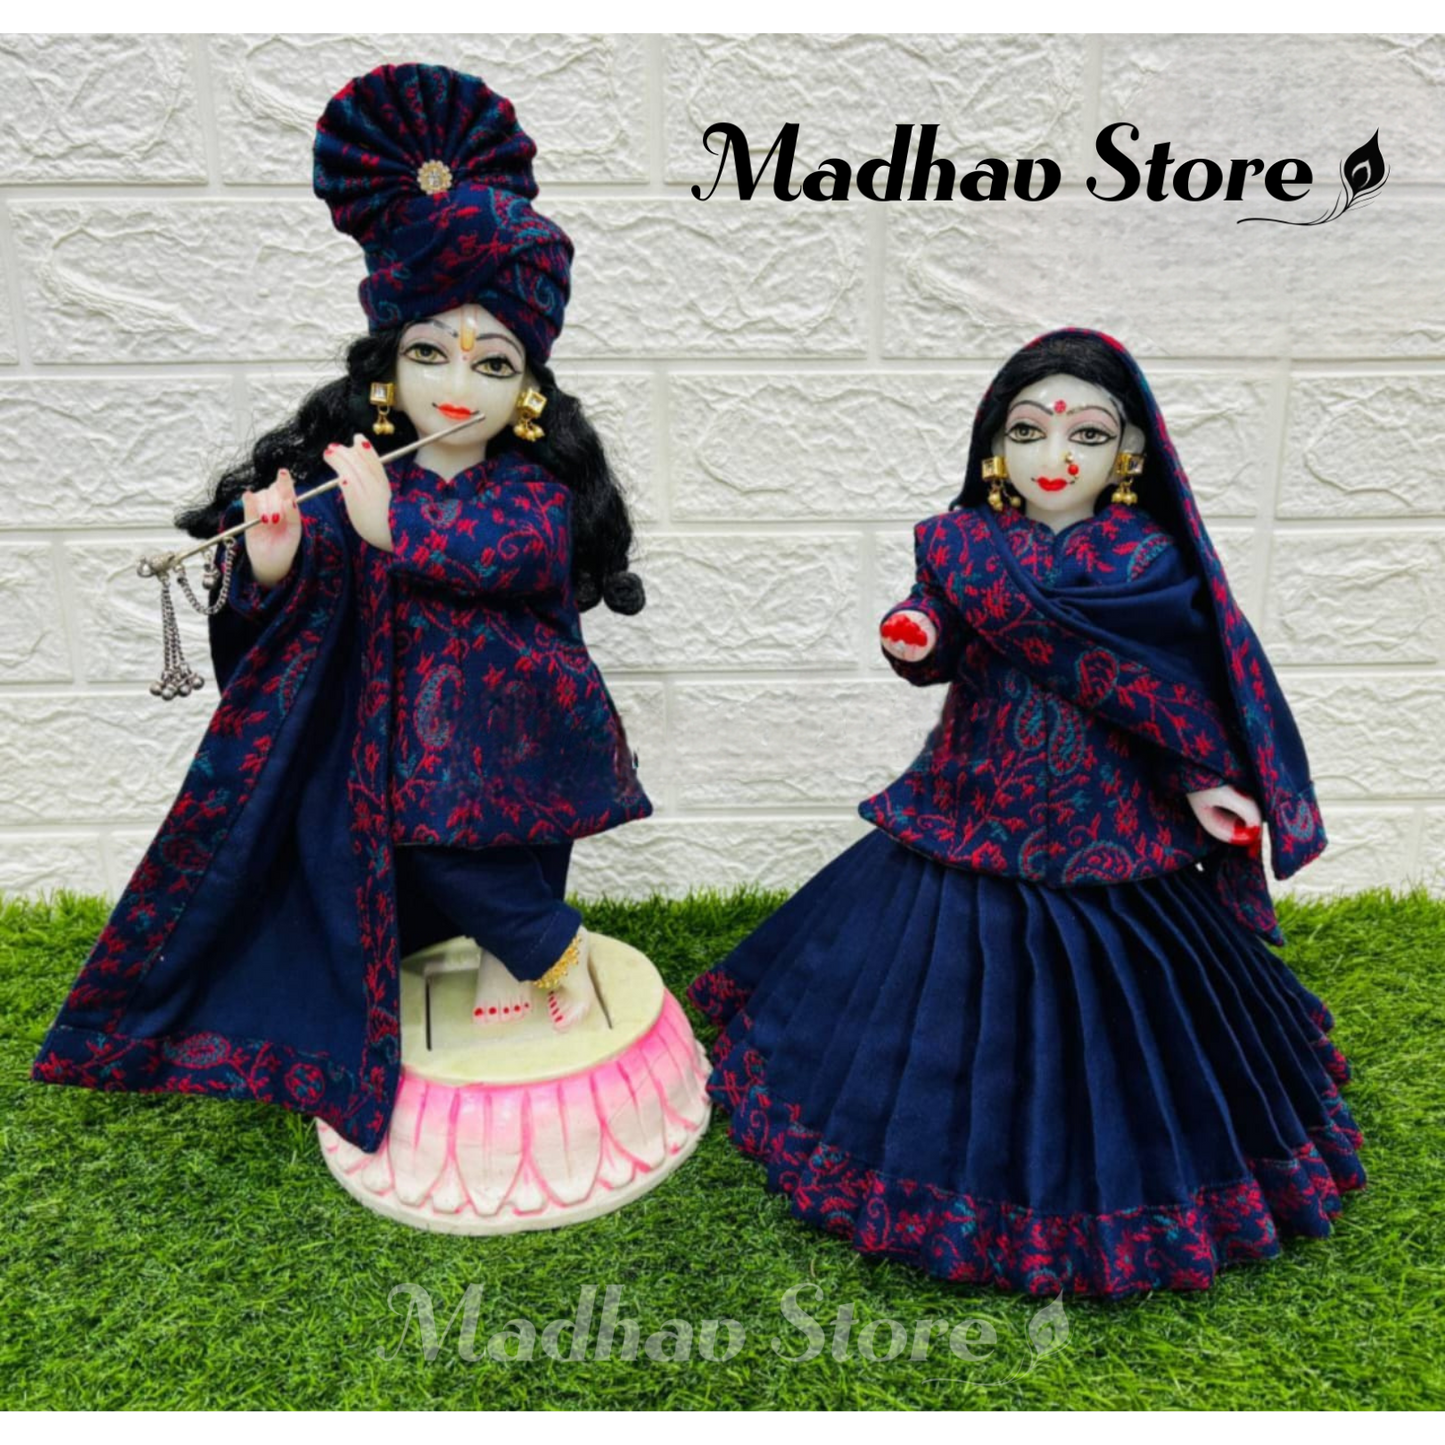 Navy Blue & Pink Cashmilon woolen winter special Dress for Radha Krishna with Pagdi